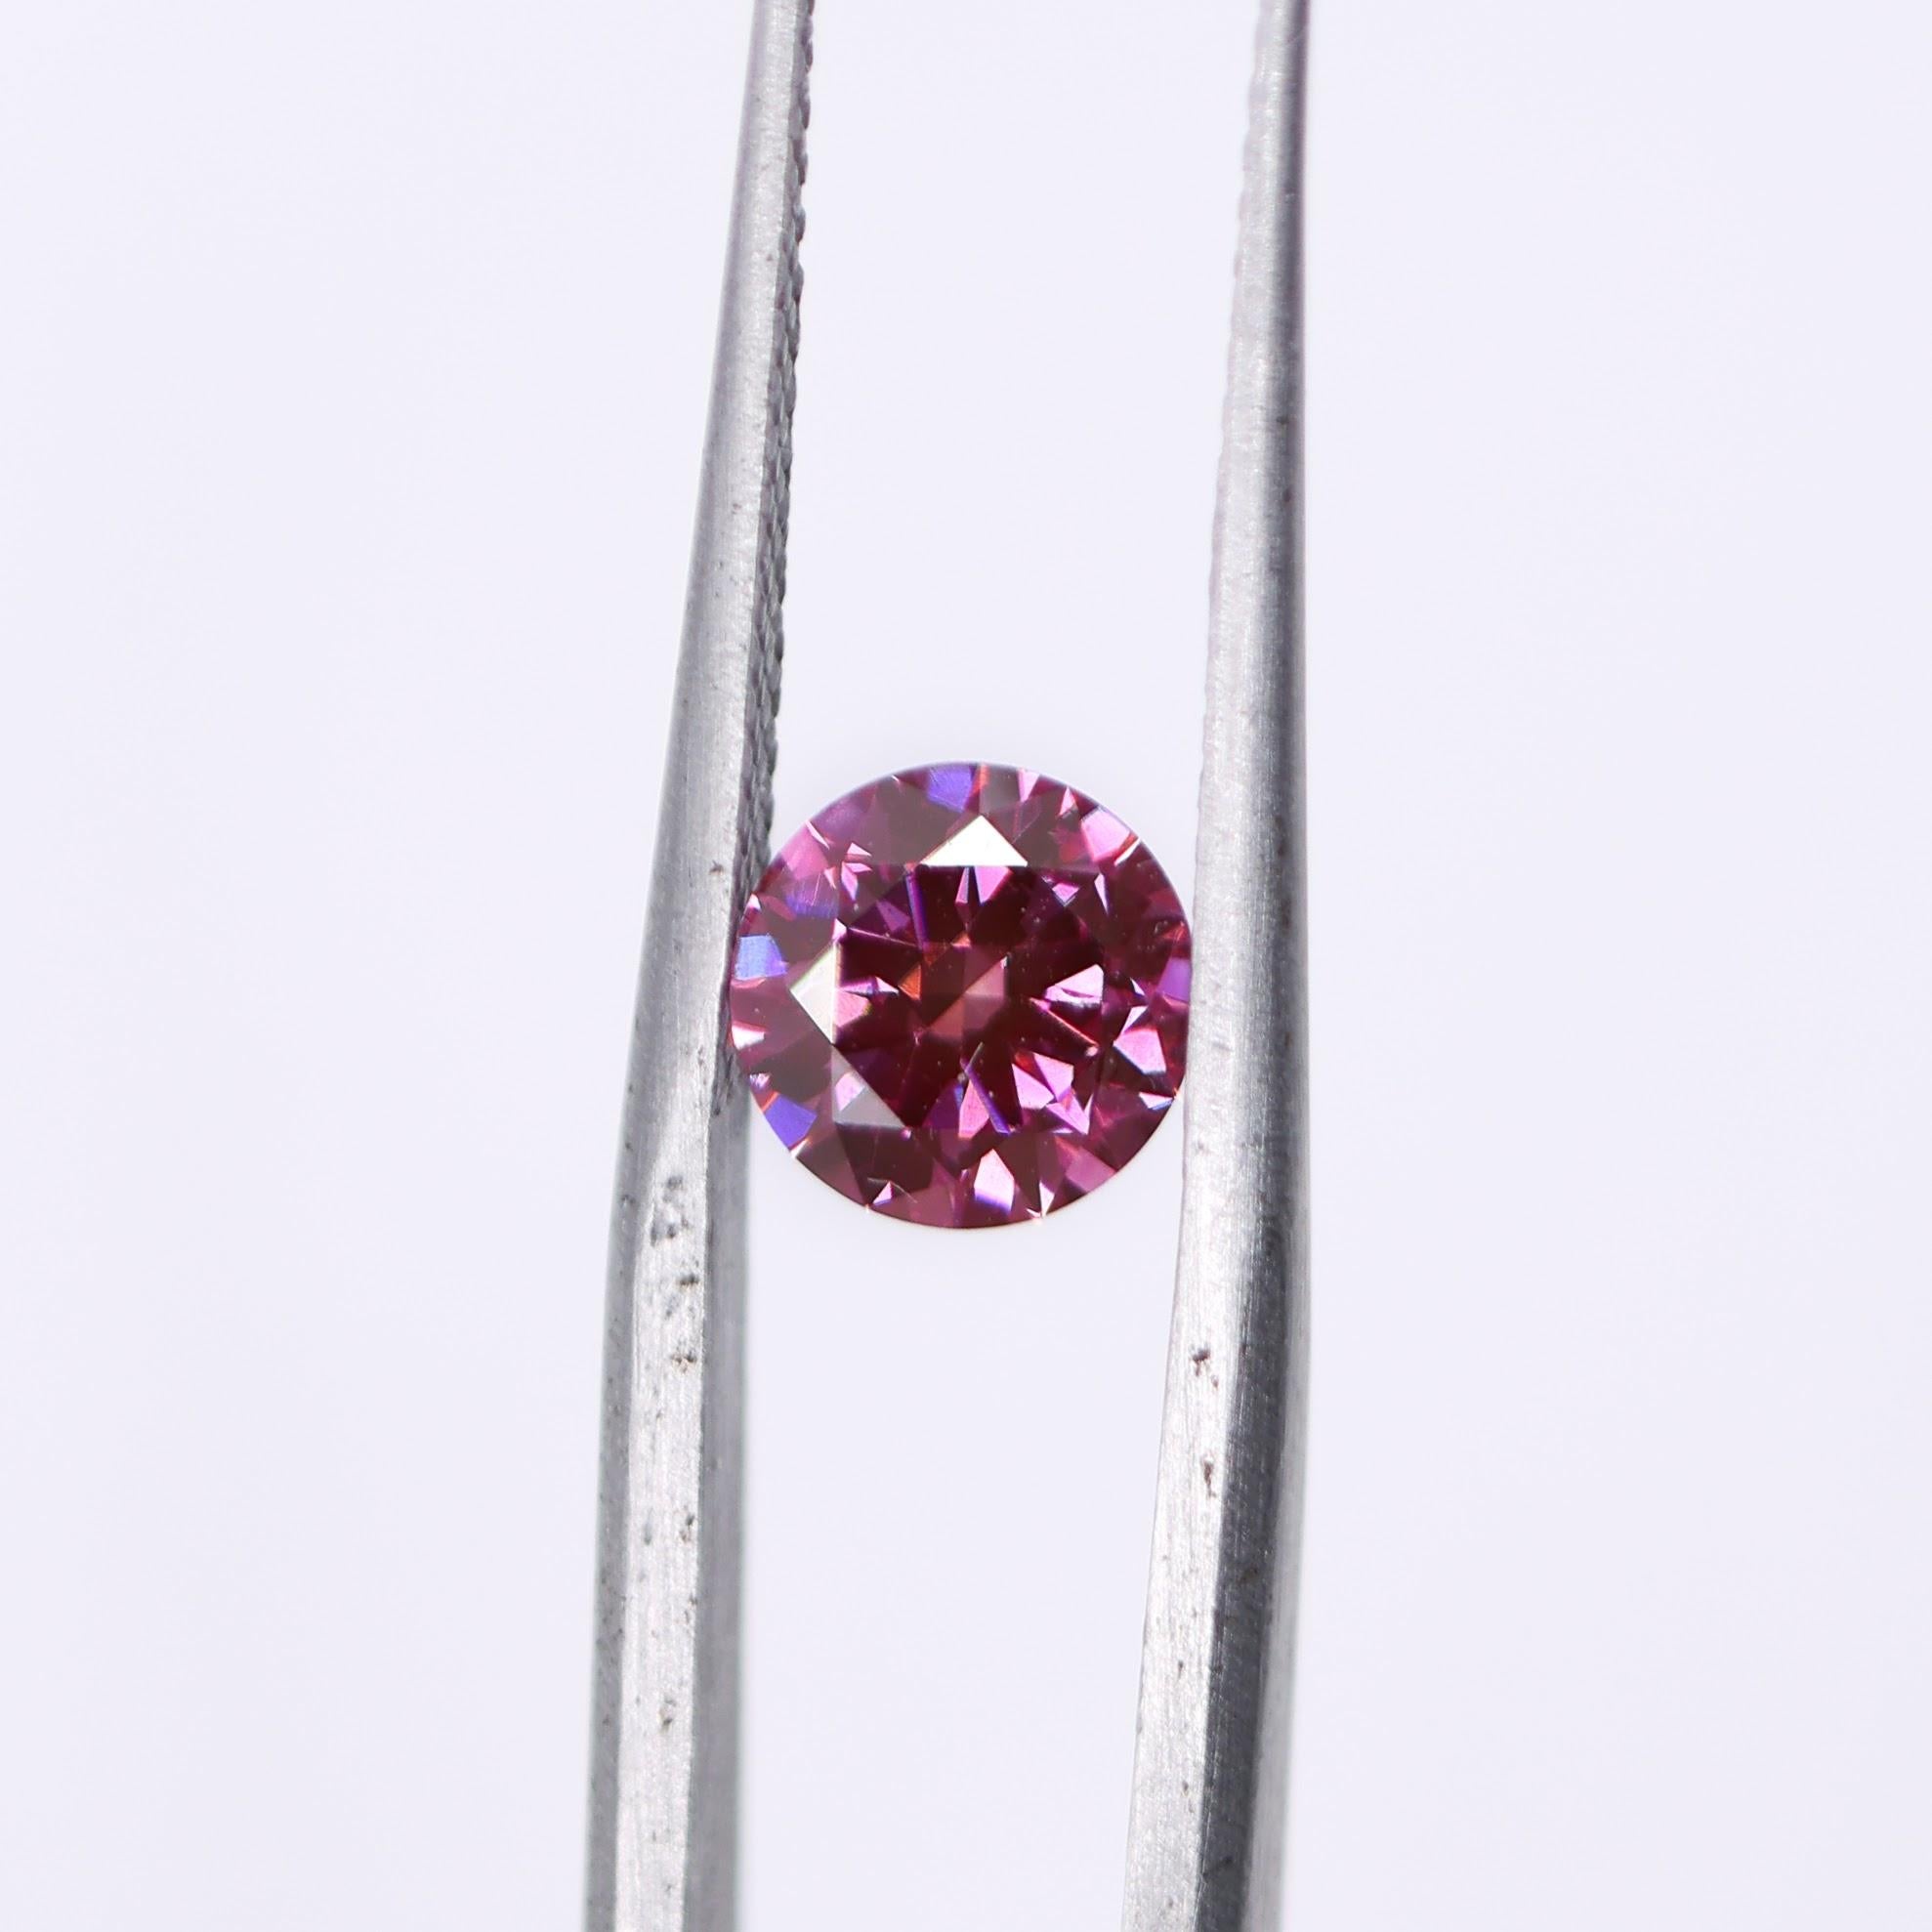 Specifications

Stone: Diamond (Natural Earth Mined )
Treatment: HPHT
Color: Purplish Pink
Cut: Brilliant
Clarity: VS2
Carat Weight: 1.00 carat
Shape: Round
Size: 6.5mm (depth is 3.81mm)
Hardness: 10
Number of Pieces: 1

Sku: AK21160/25000